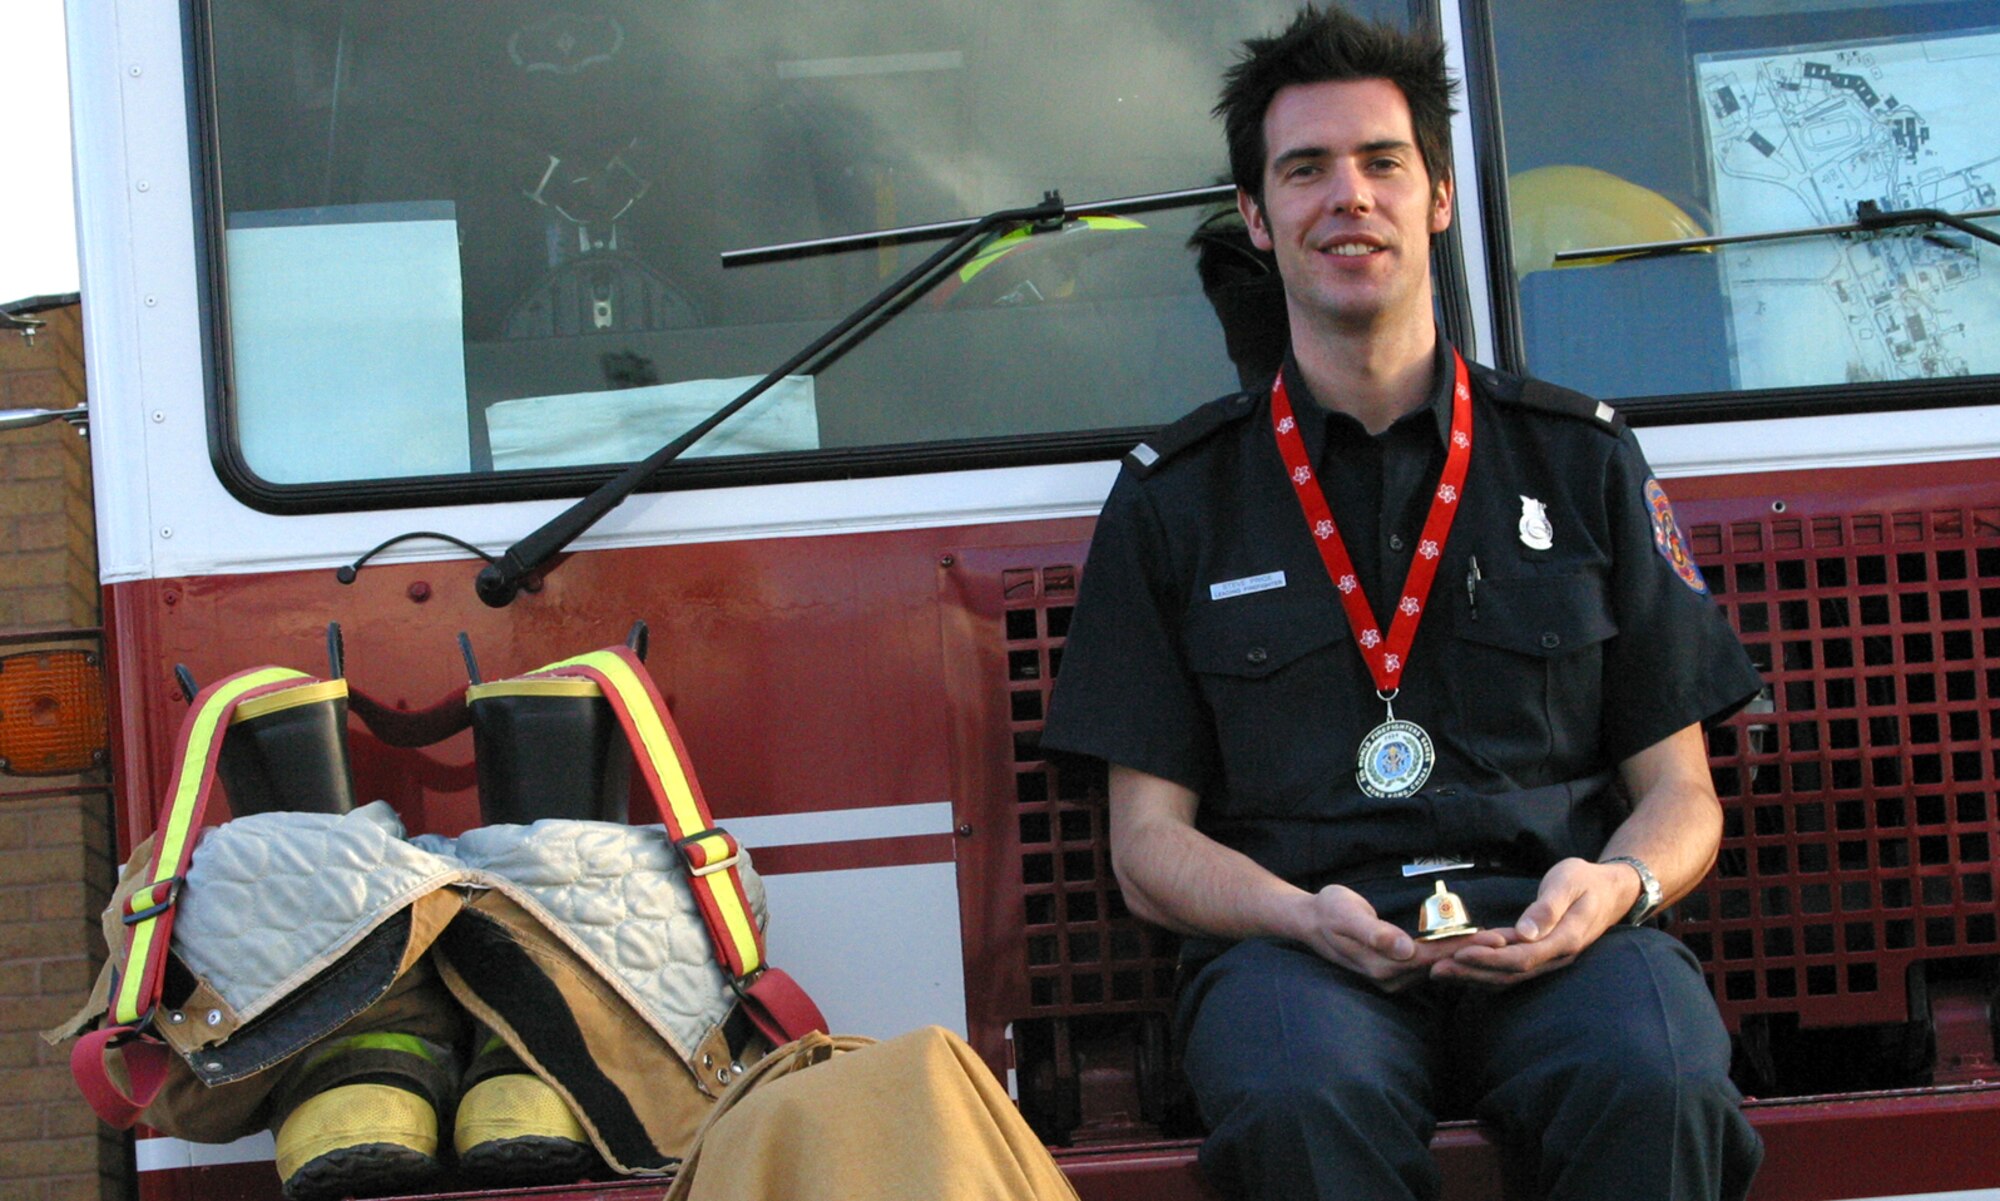 Lead Firefighter Steve Price displays the gold medal and firefighter’s hat he won at the 9th World Firefighter Games in Hong Kong. He won the gold in the indoor rowing event. More than 3,000 firefighters from 32 countries attended.
